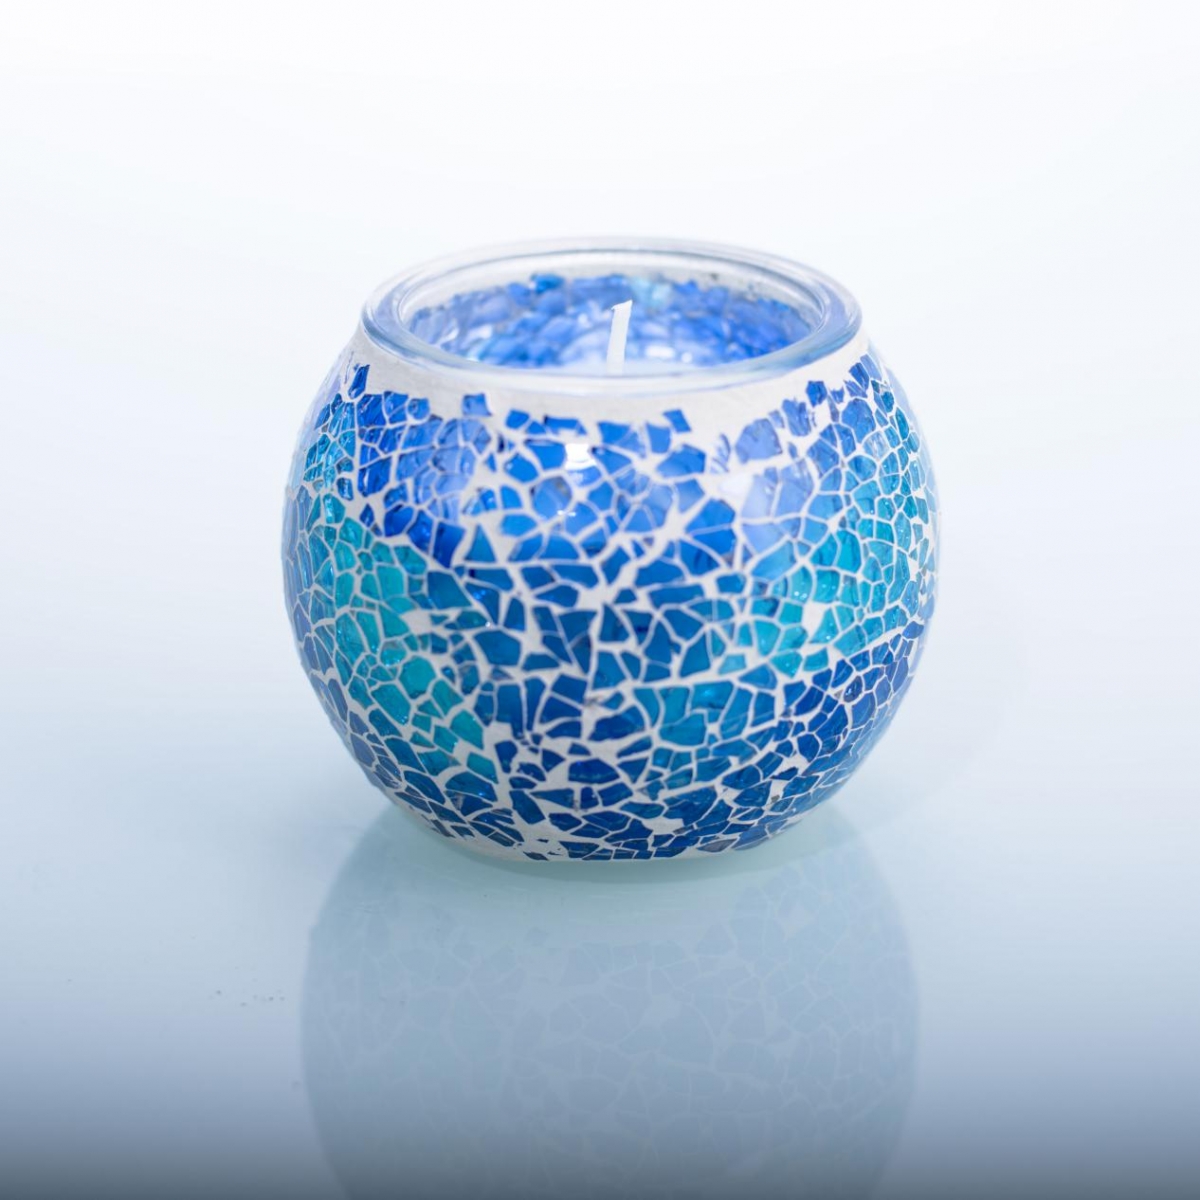 Scented Candles -Blue Colored Mosaic Glass Jar , Cedar Wood & Lavender ,Soy Candles ,China Factory ,Price-HOWCANDLE-Candles,Scented Candles,Aromatherapy Candles,Soy Candles,Vegan Candles,Jar Candles,Pillar Candles,Candle Gift Sets,Essential Oils,Reed Diffuser,Candle Holder,